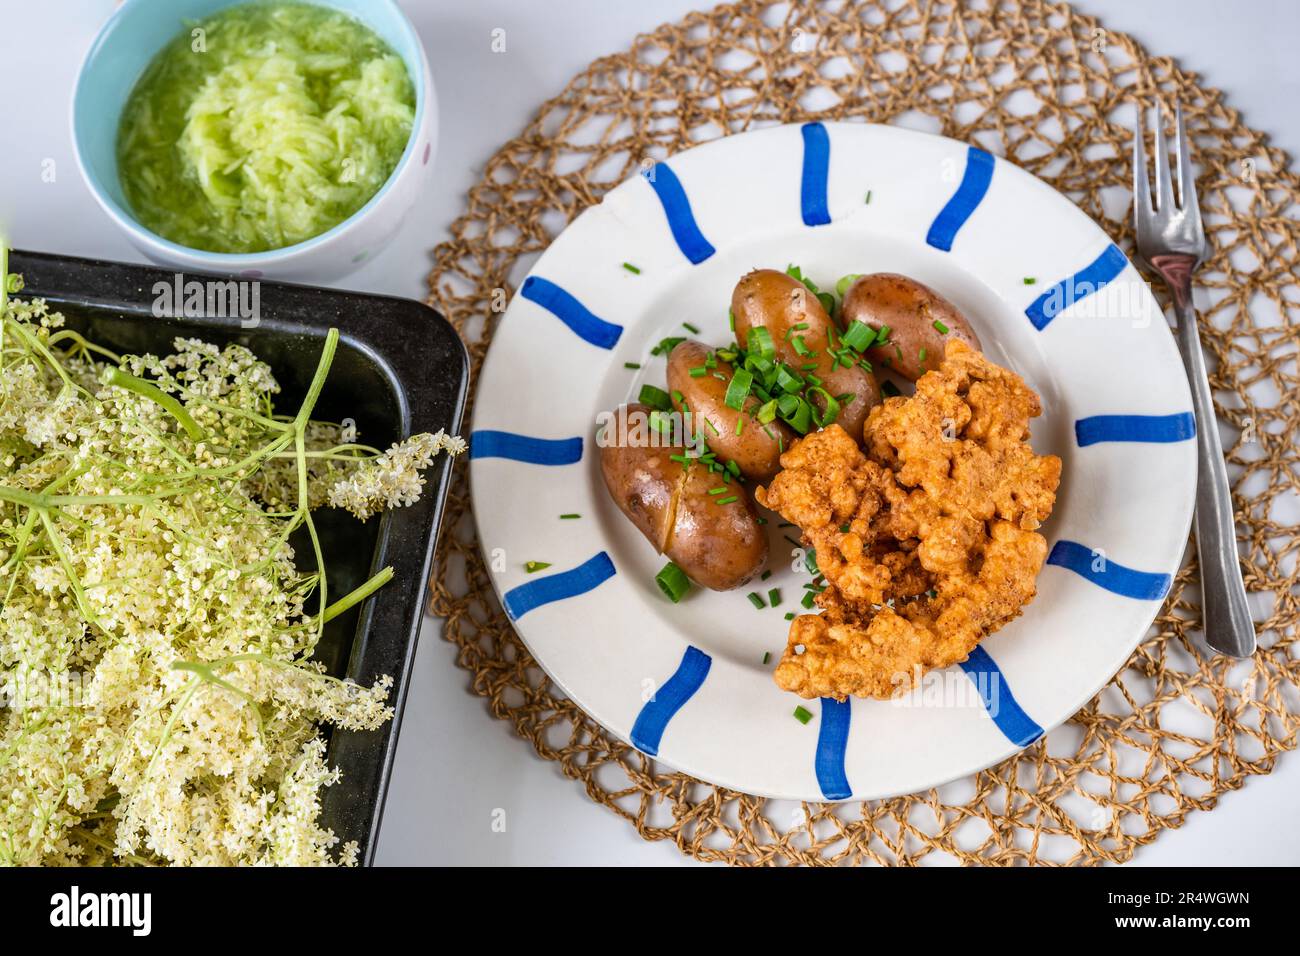 Plate with fried elder flower in dough and potato, elder flowers on baking pan and cucumber salad on table. Stock Photo